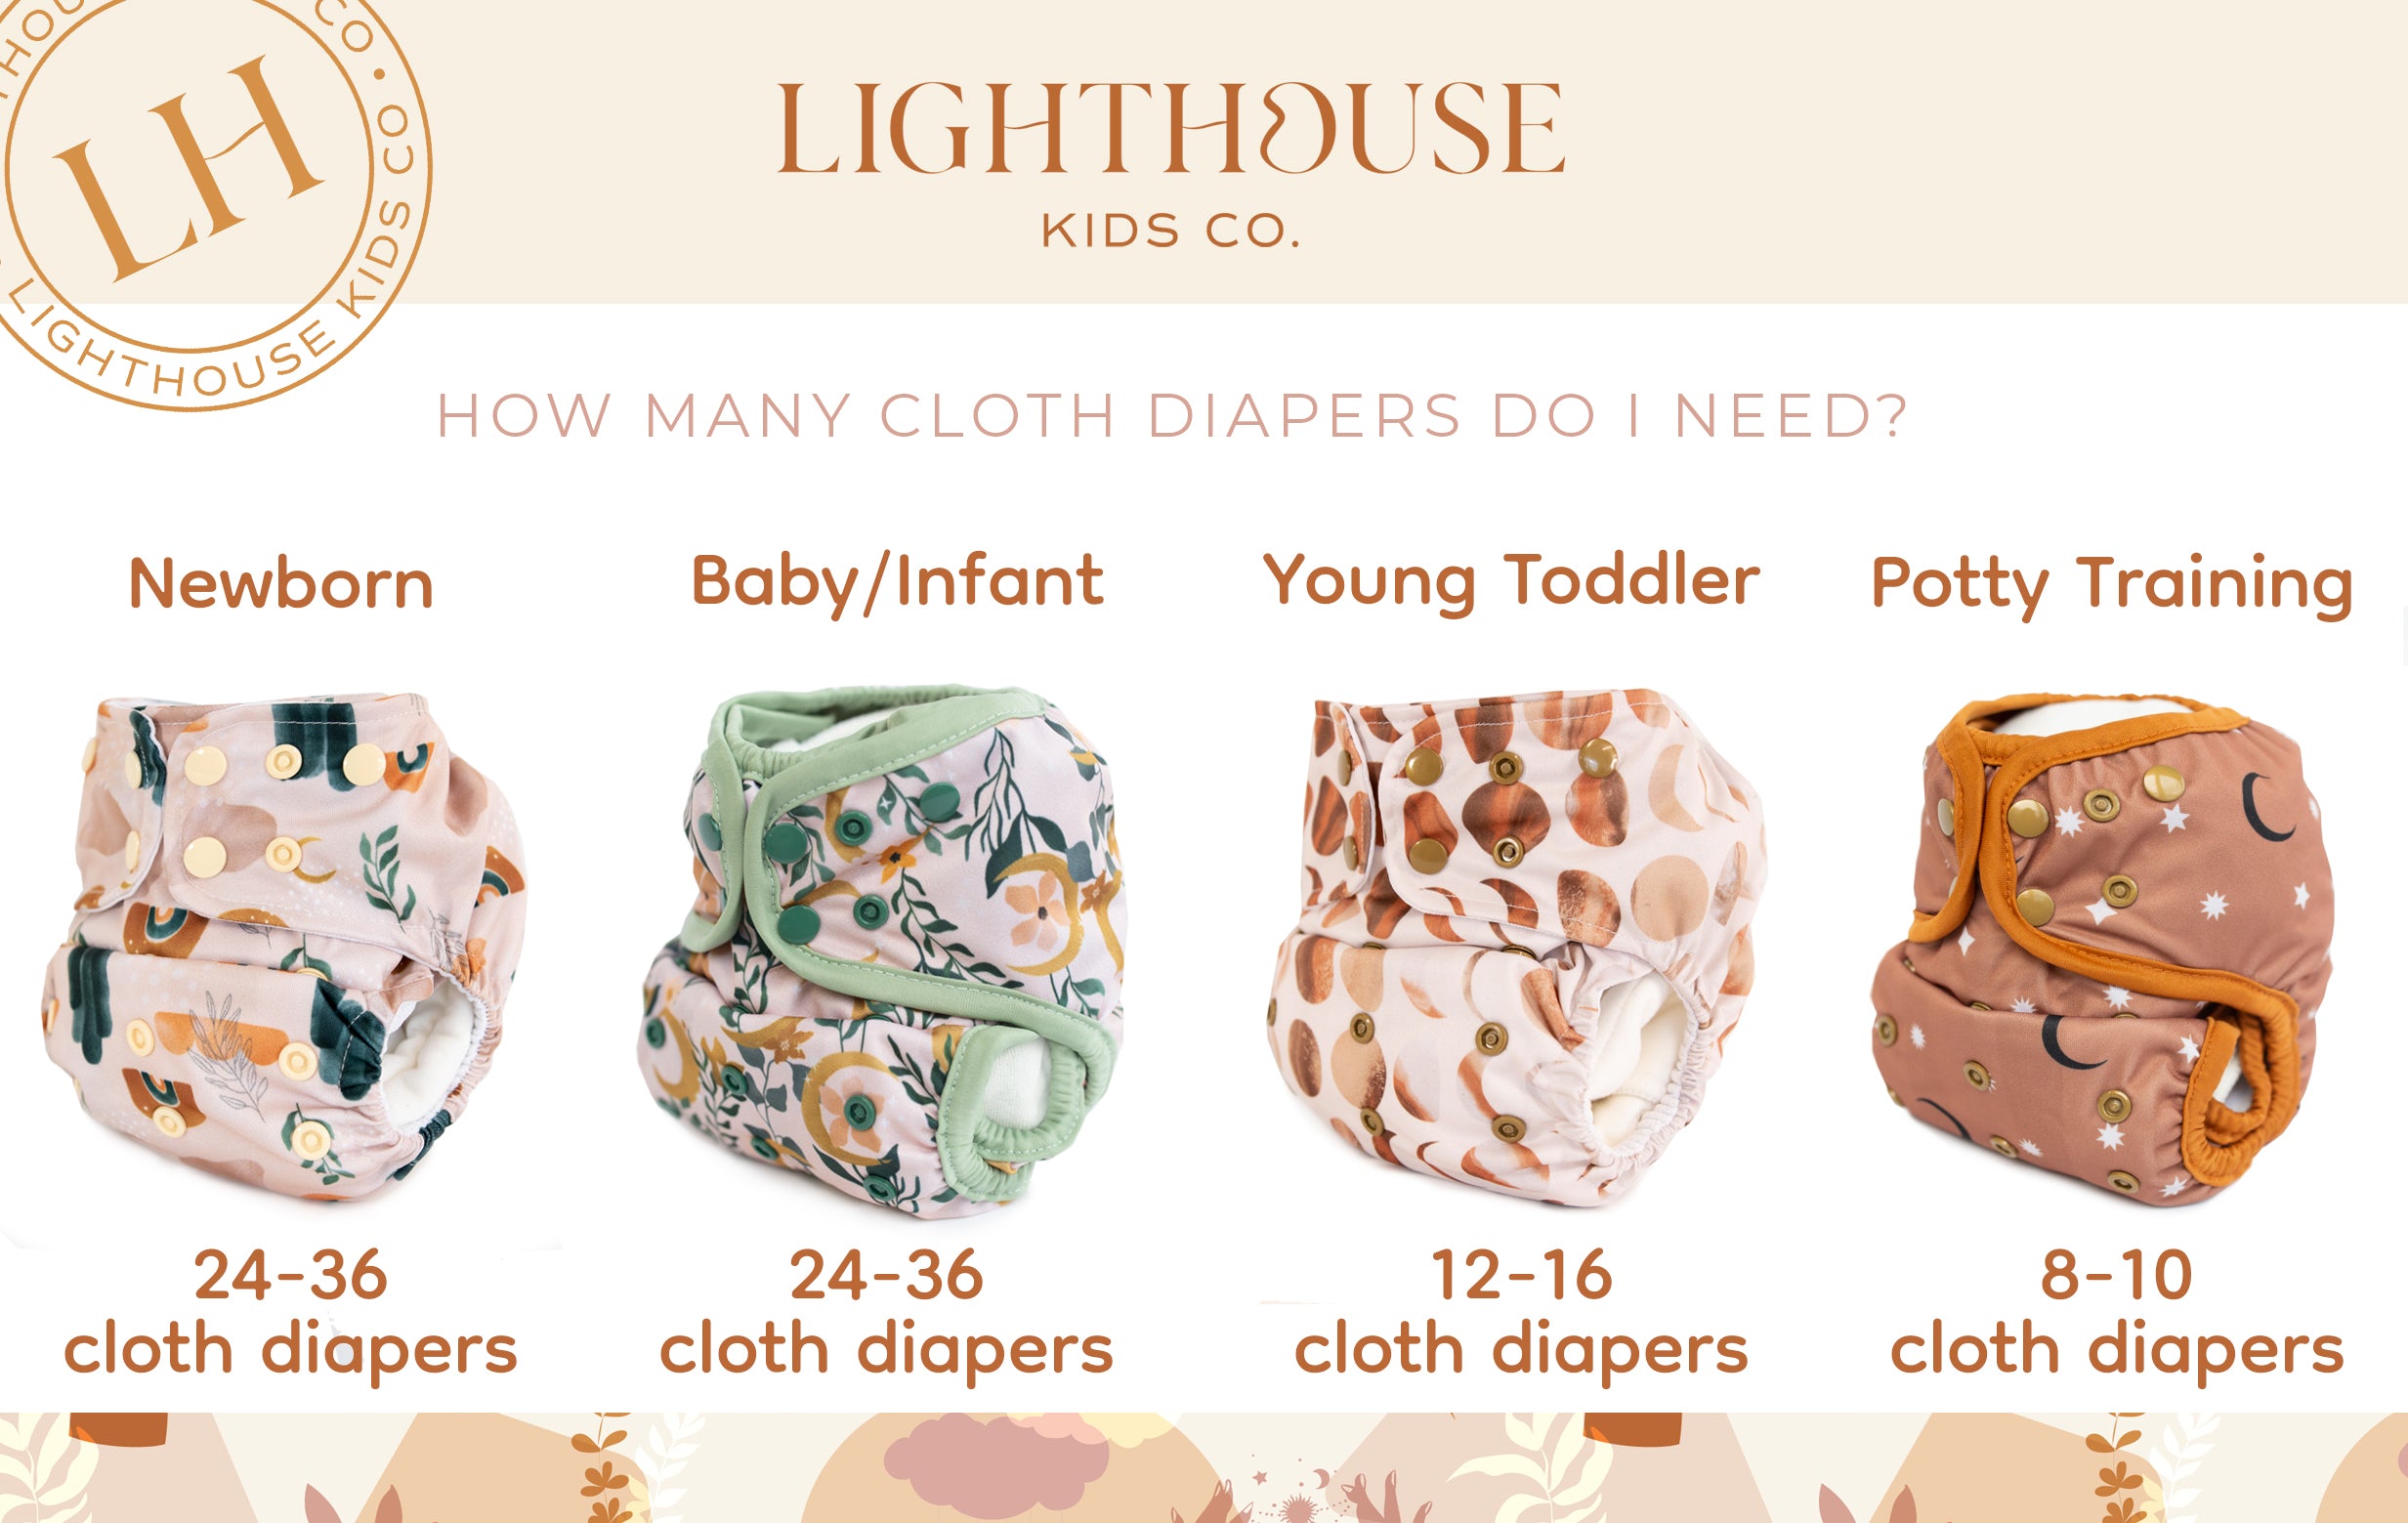 How many cloth diapers do you need to switch